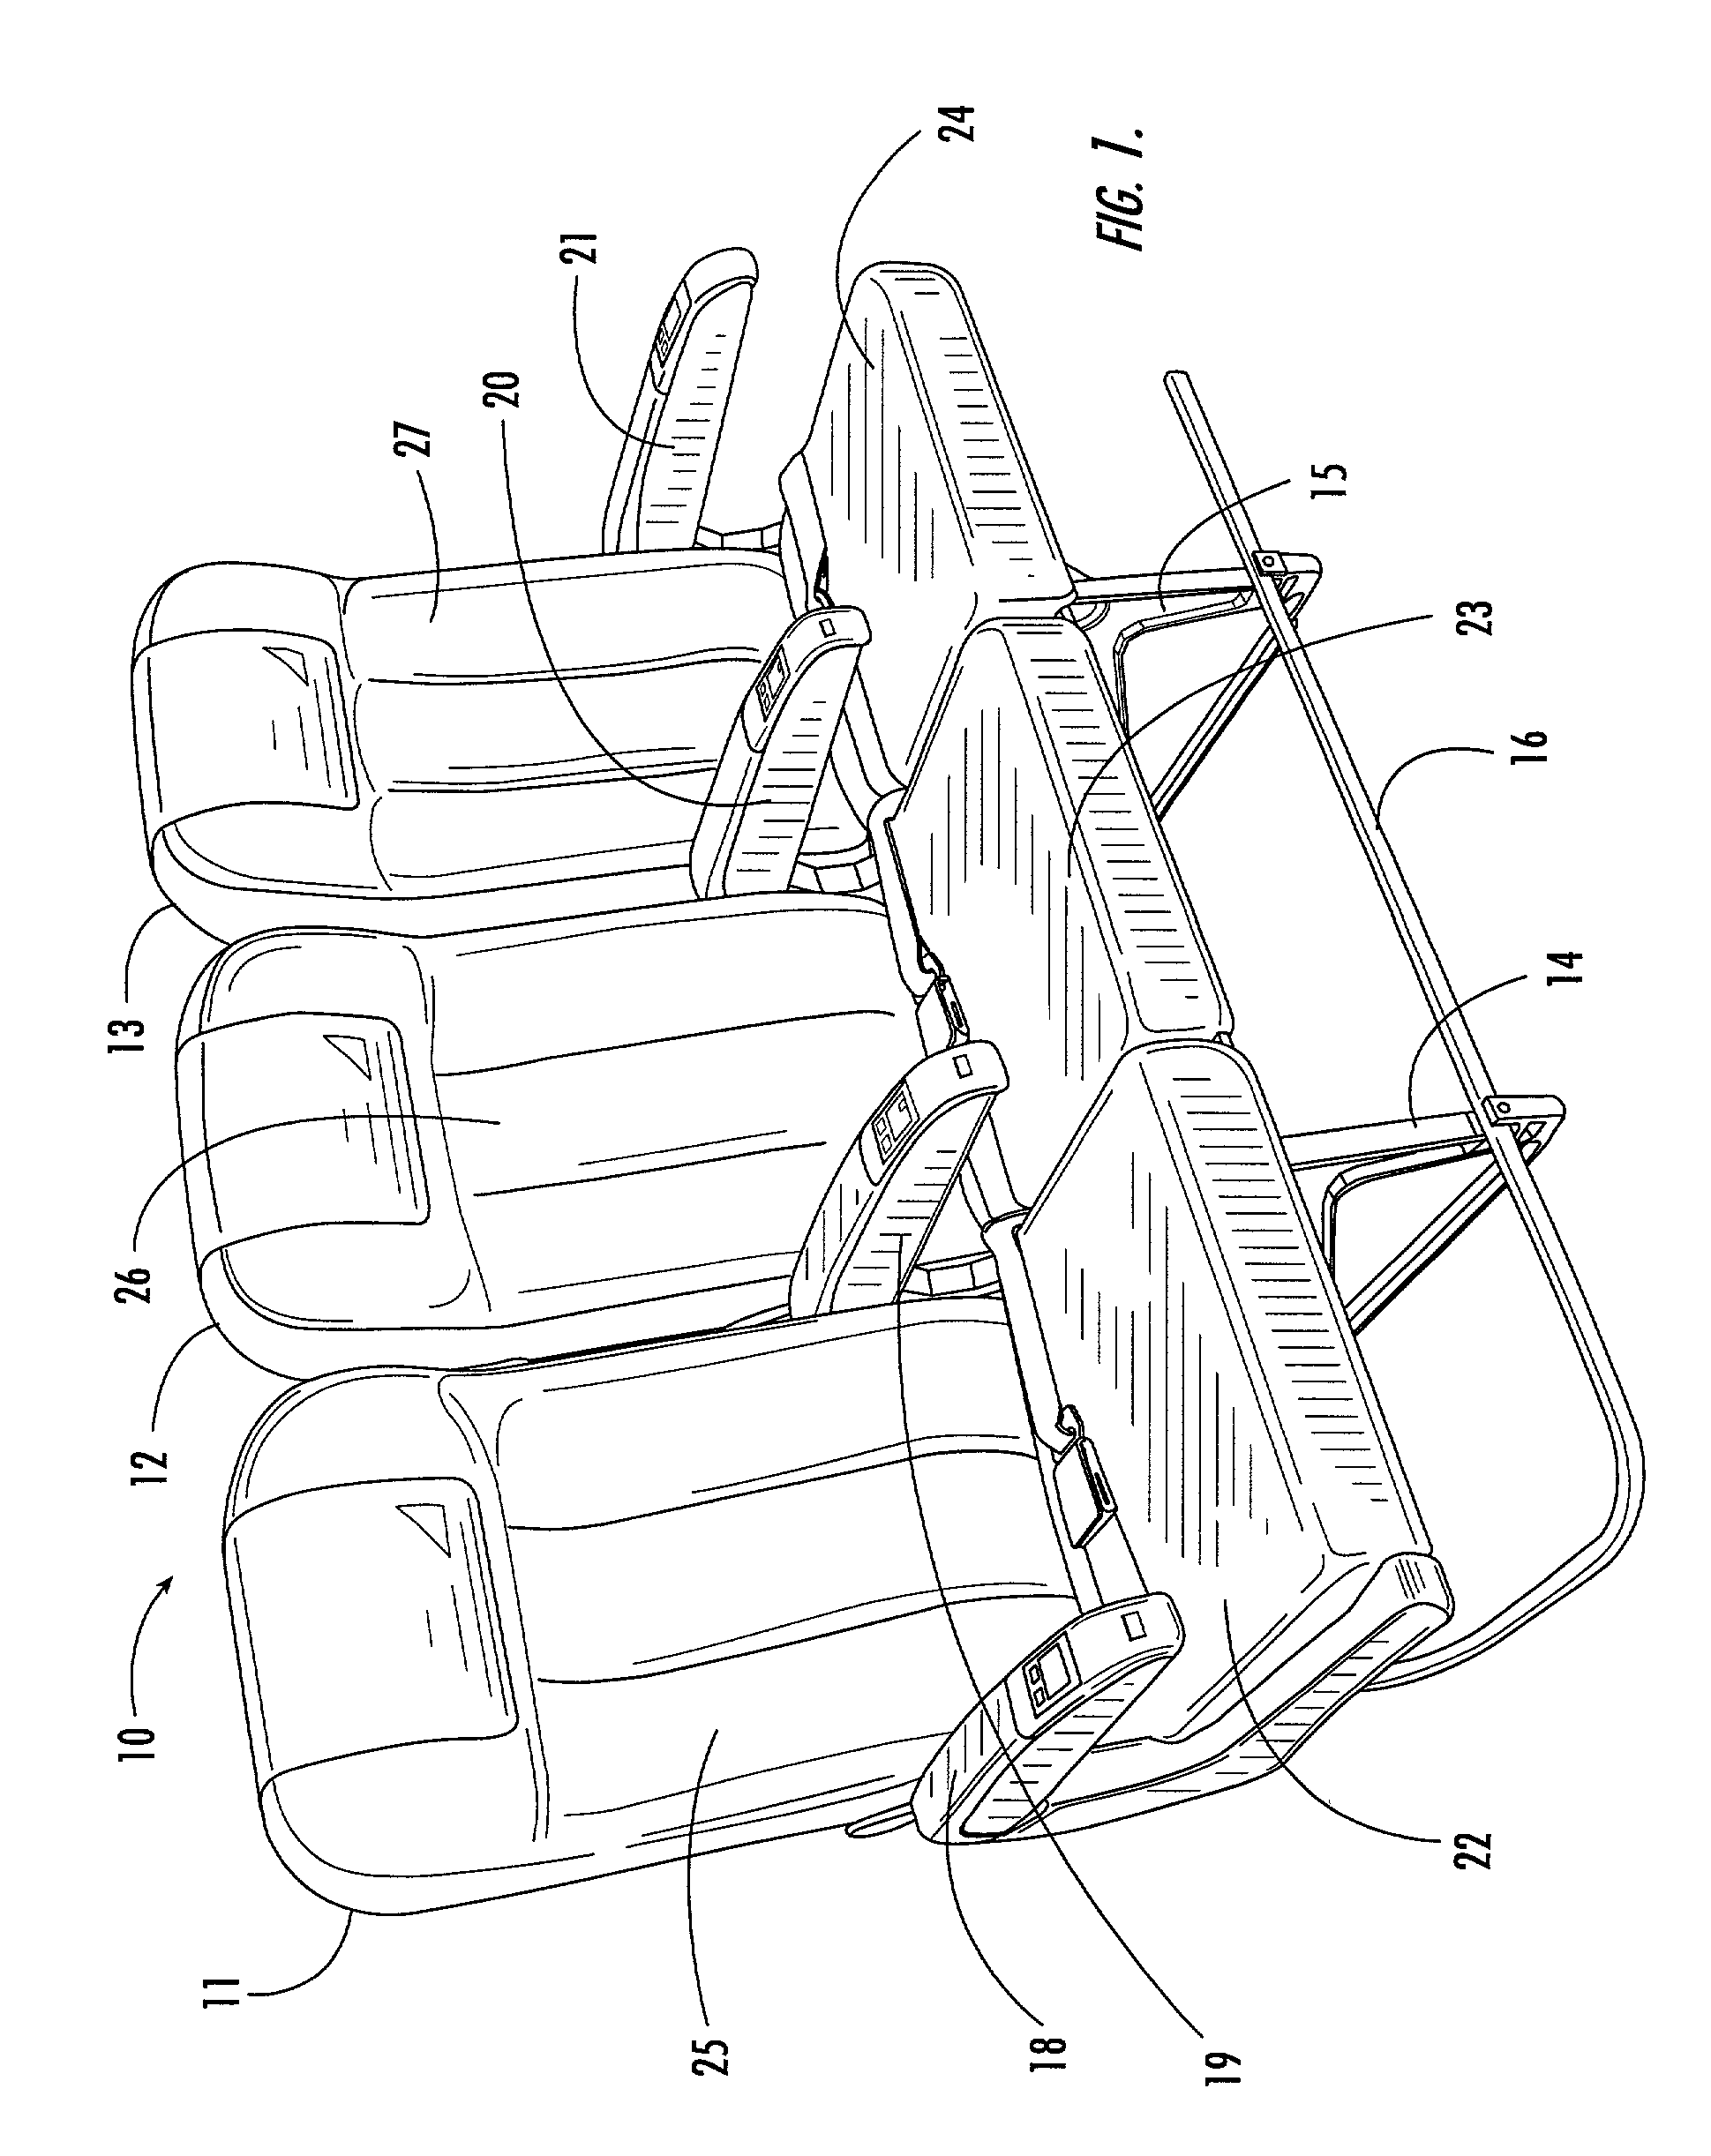 Passenger seat with low profile seat back recline locking assembly